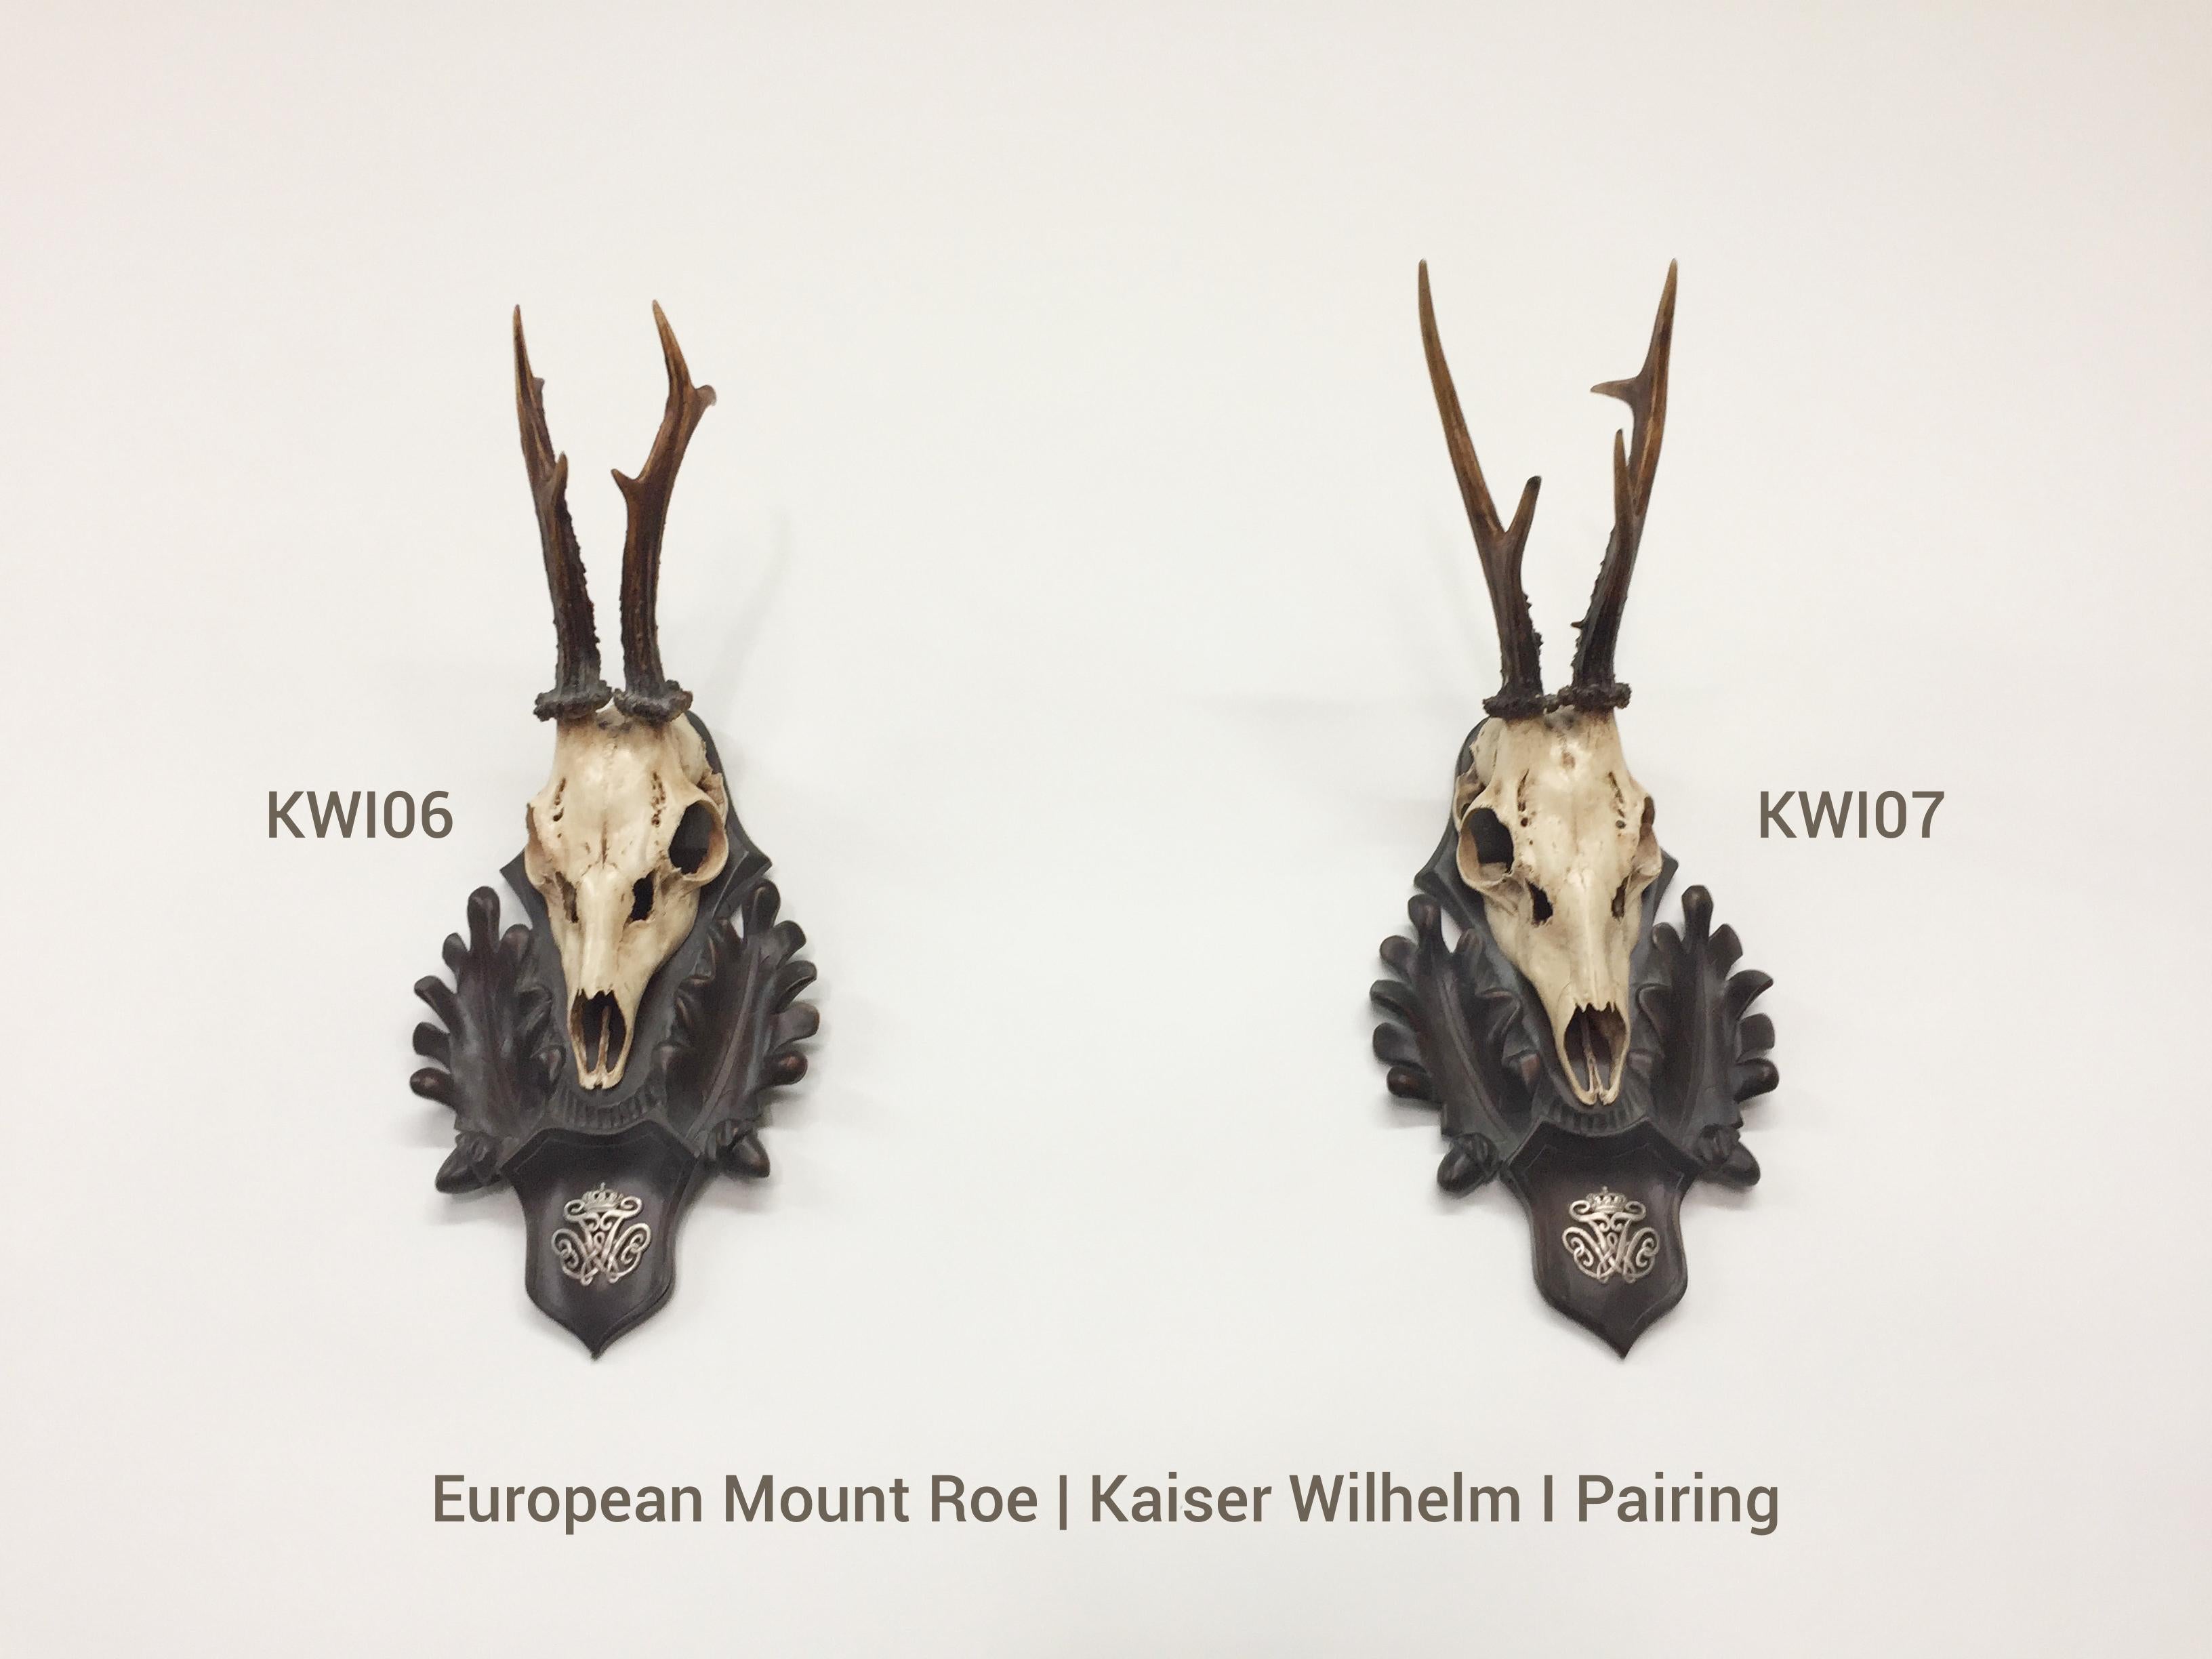 An extraordinary pairing of European Mount Roe Trophies, attributed to Kaiser Wilhelm I, King of Prussia and the first Emperor (Kaiser) of the United Germans. These 19th century Roe Trophies are mounted on hand-carved Black Forest plaques, featuring